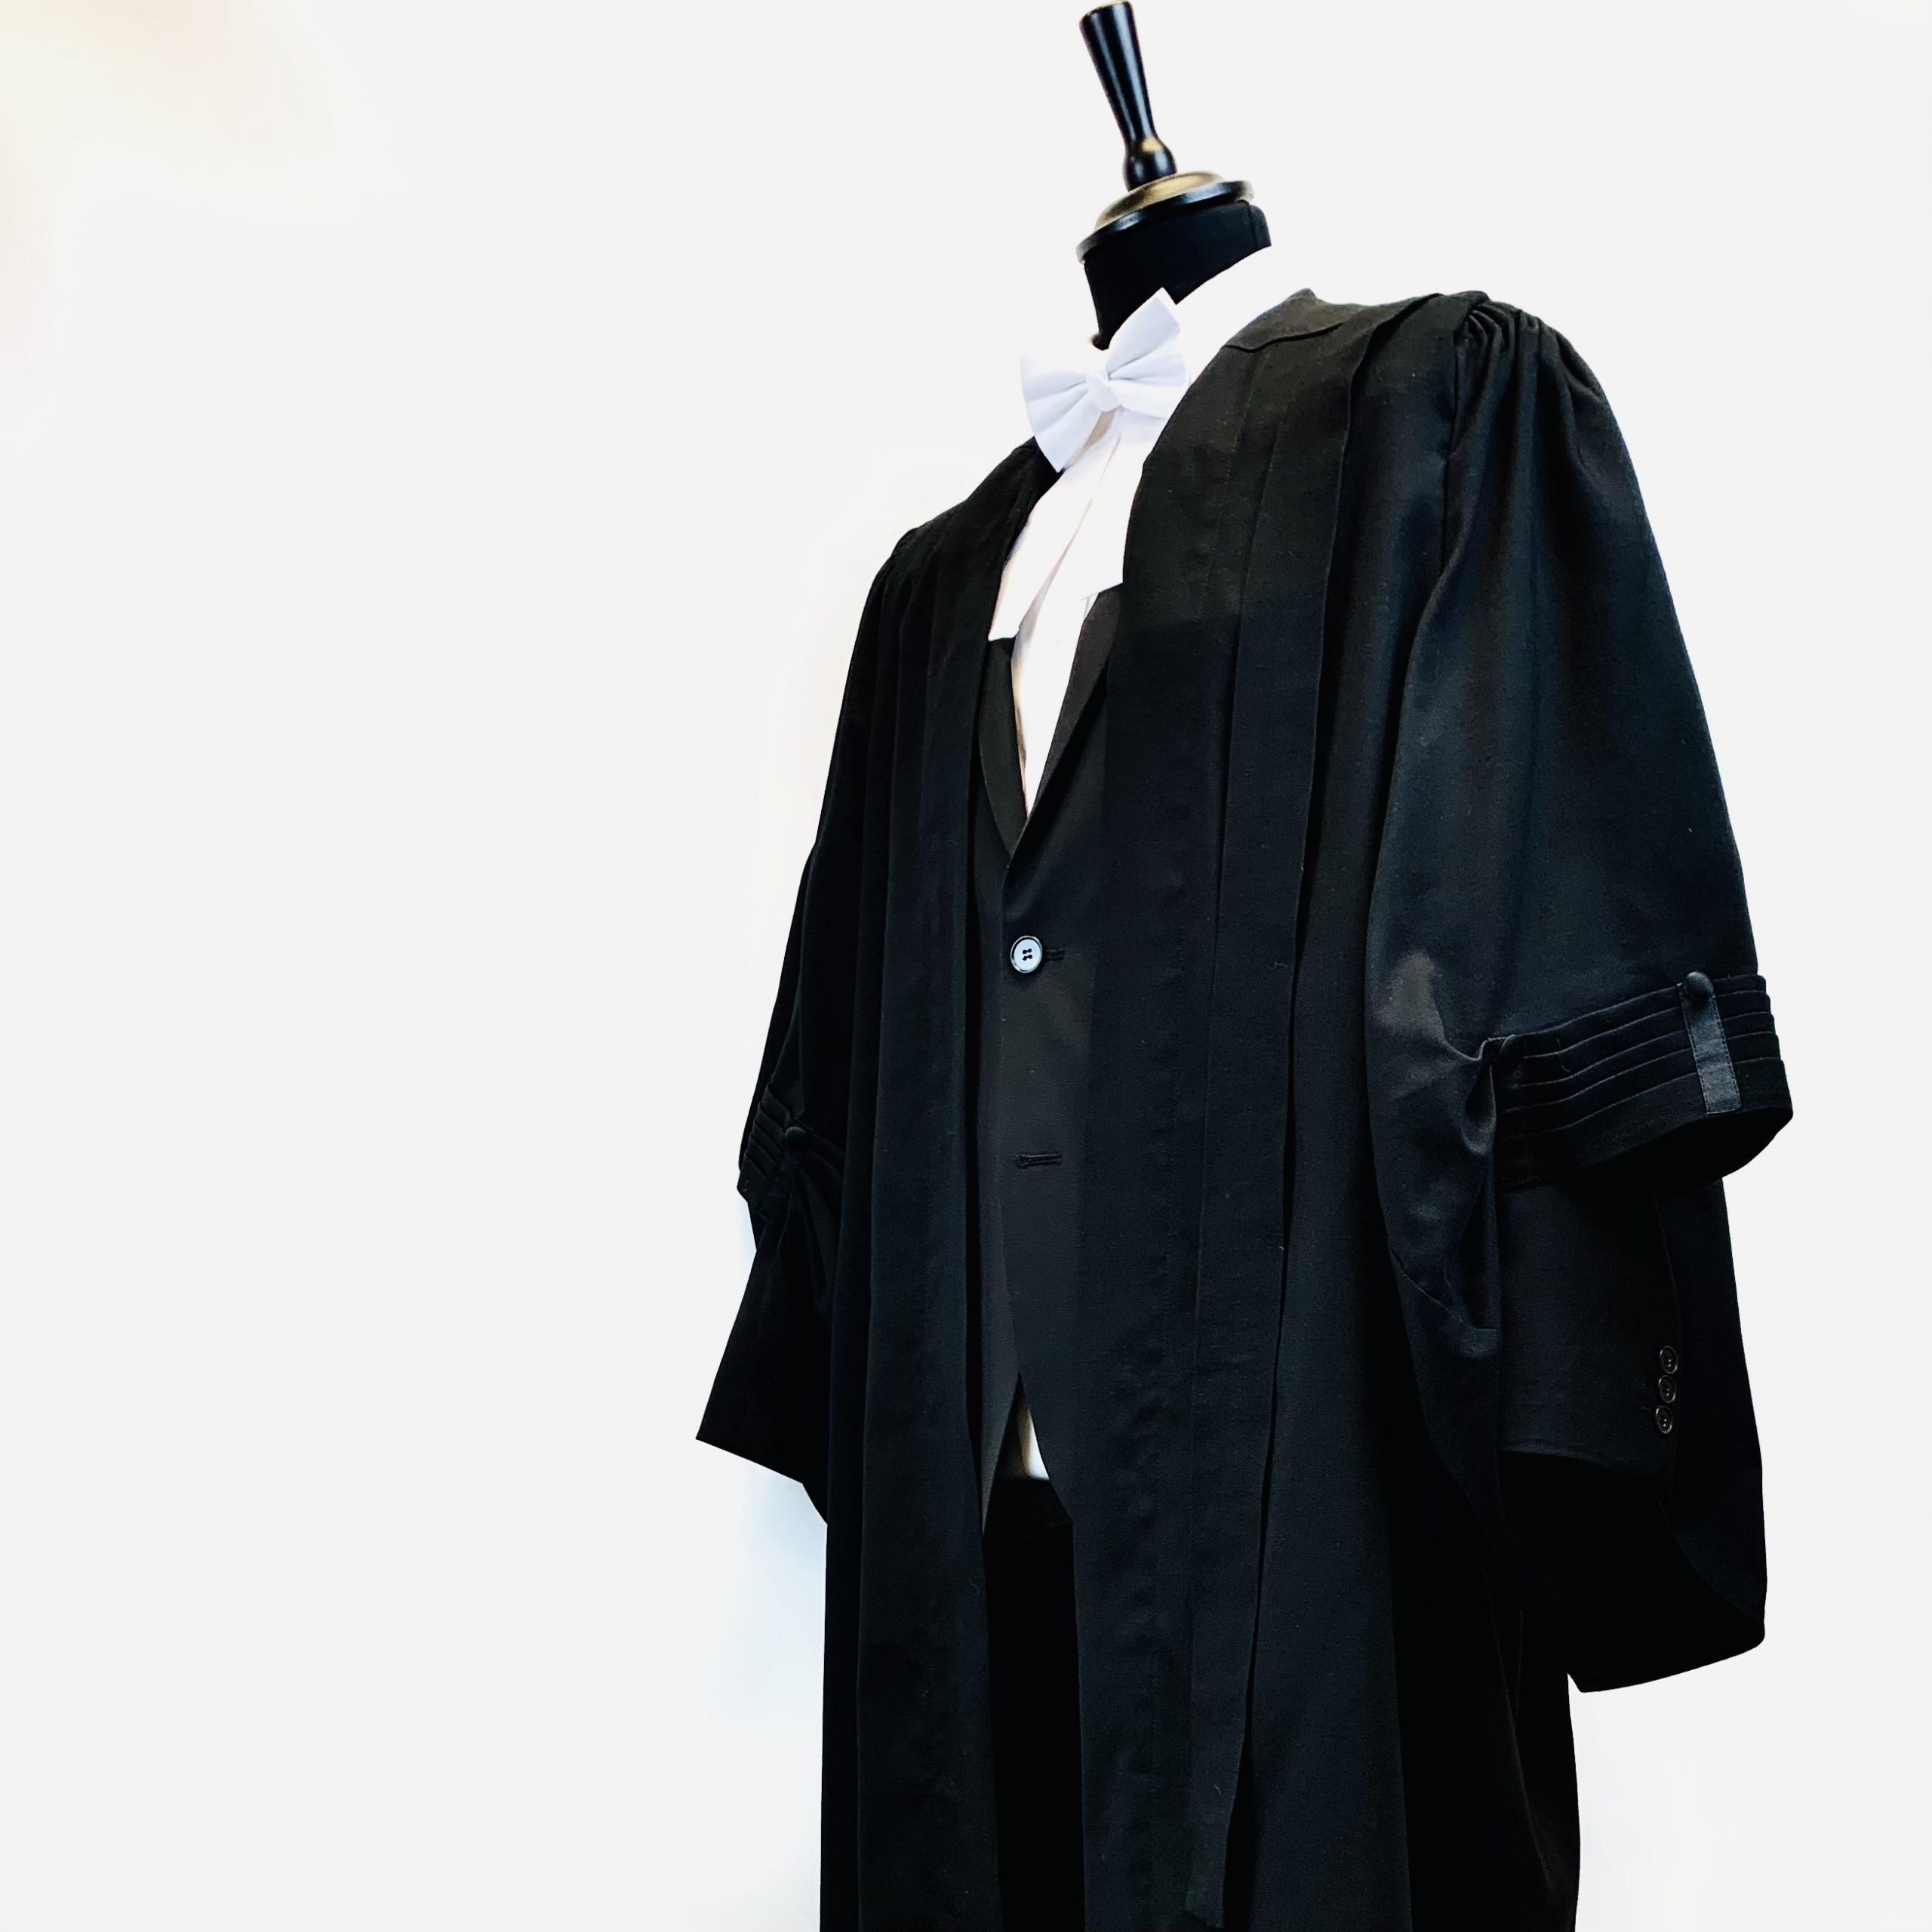 Legal Gowns